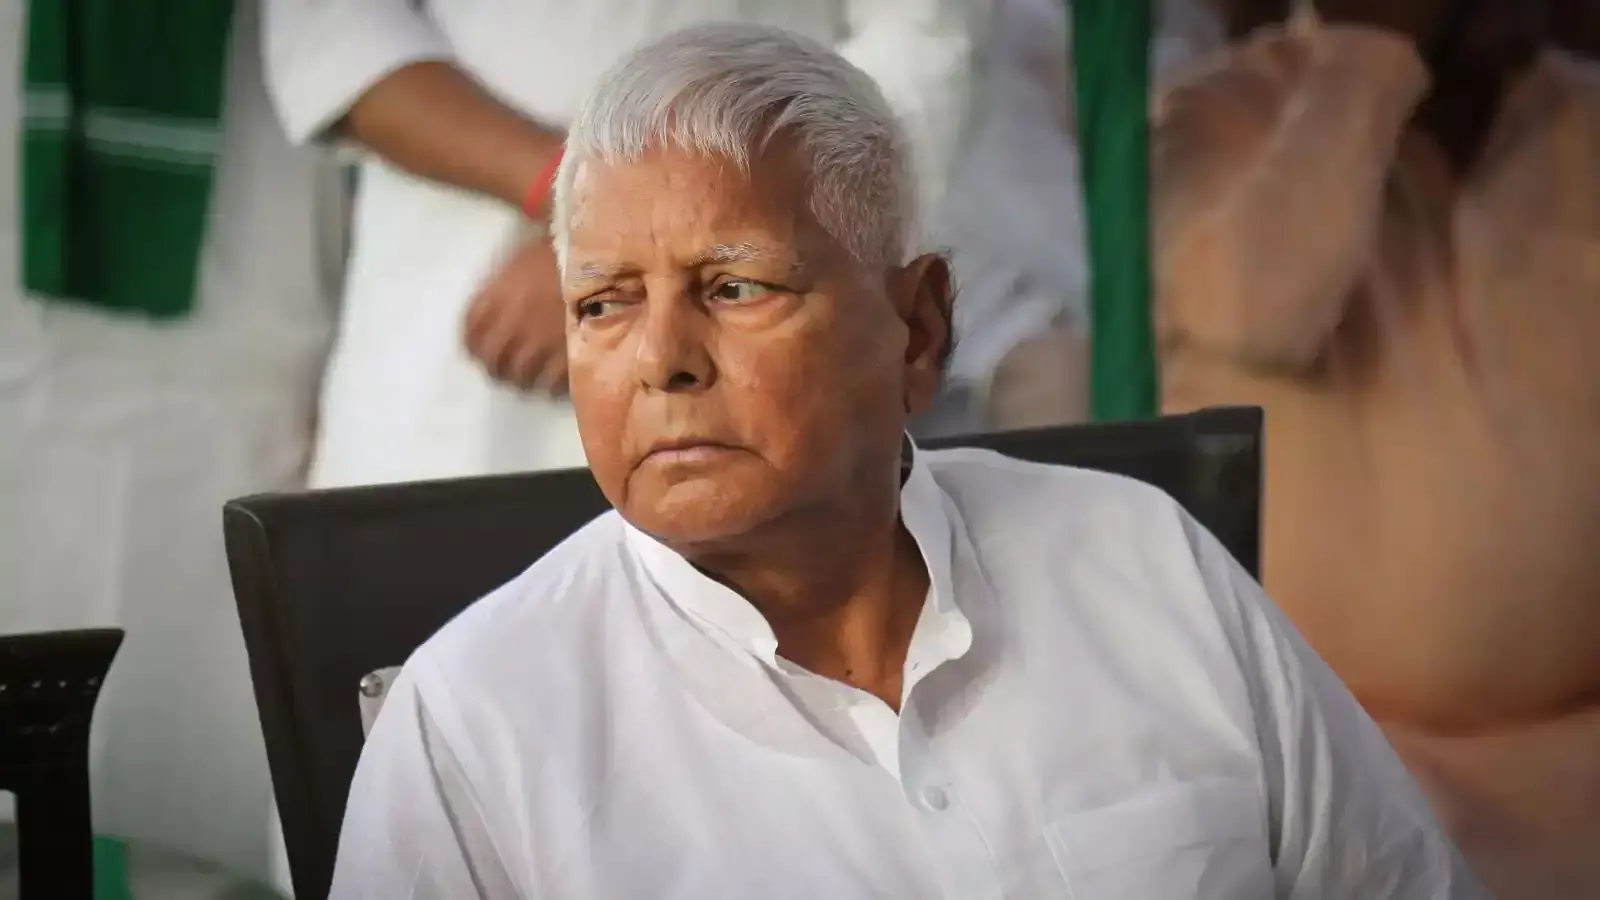 Land for jobs scam: Lalu Prasad Yadav questioned by the CBI for nearly two hours